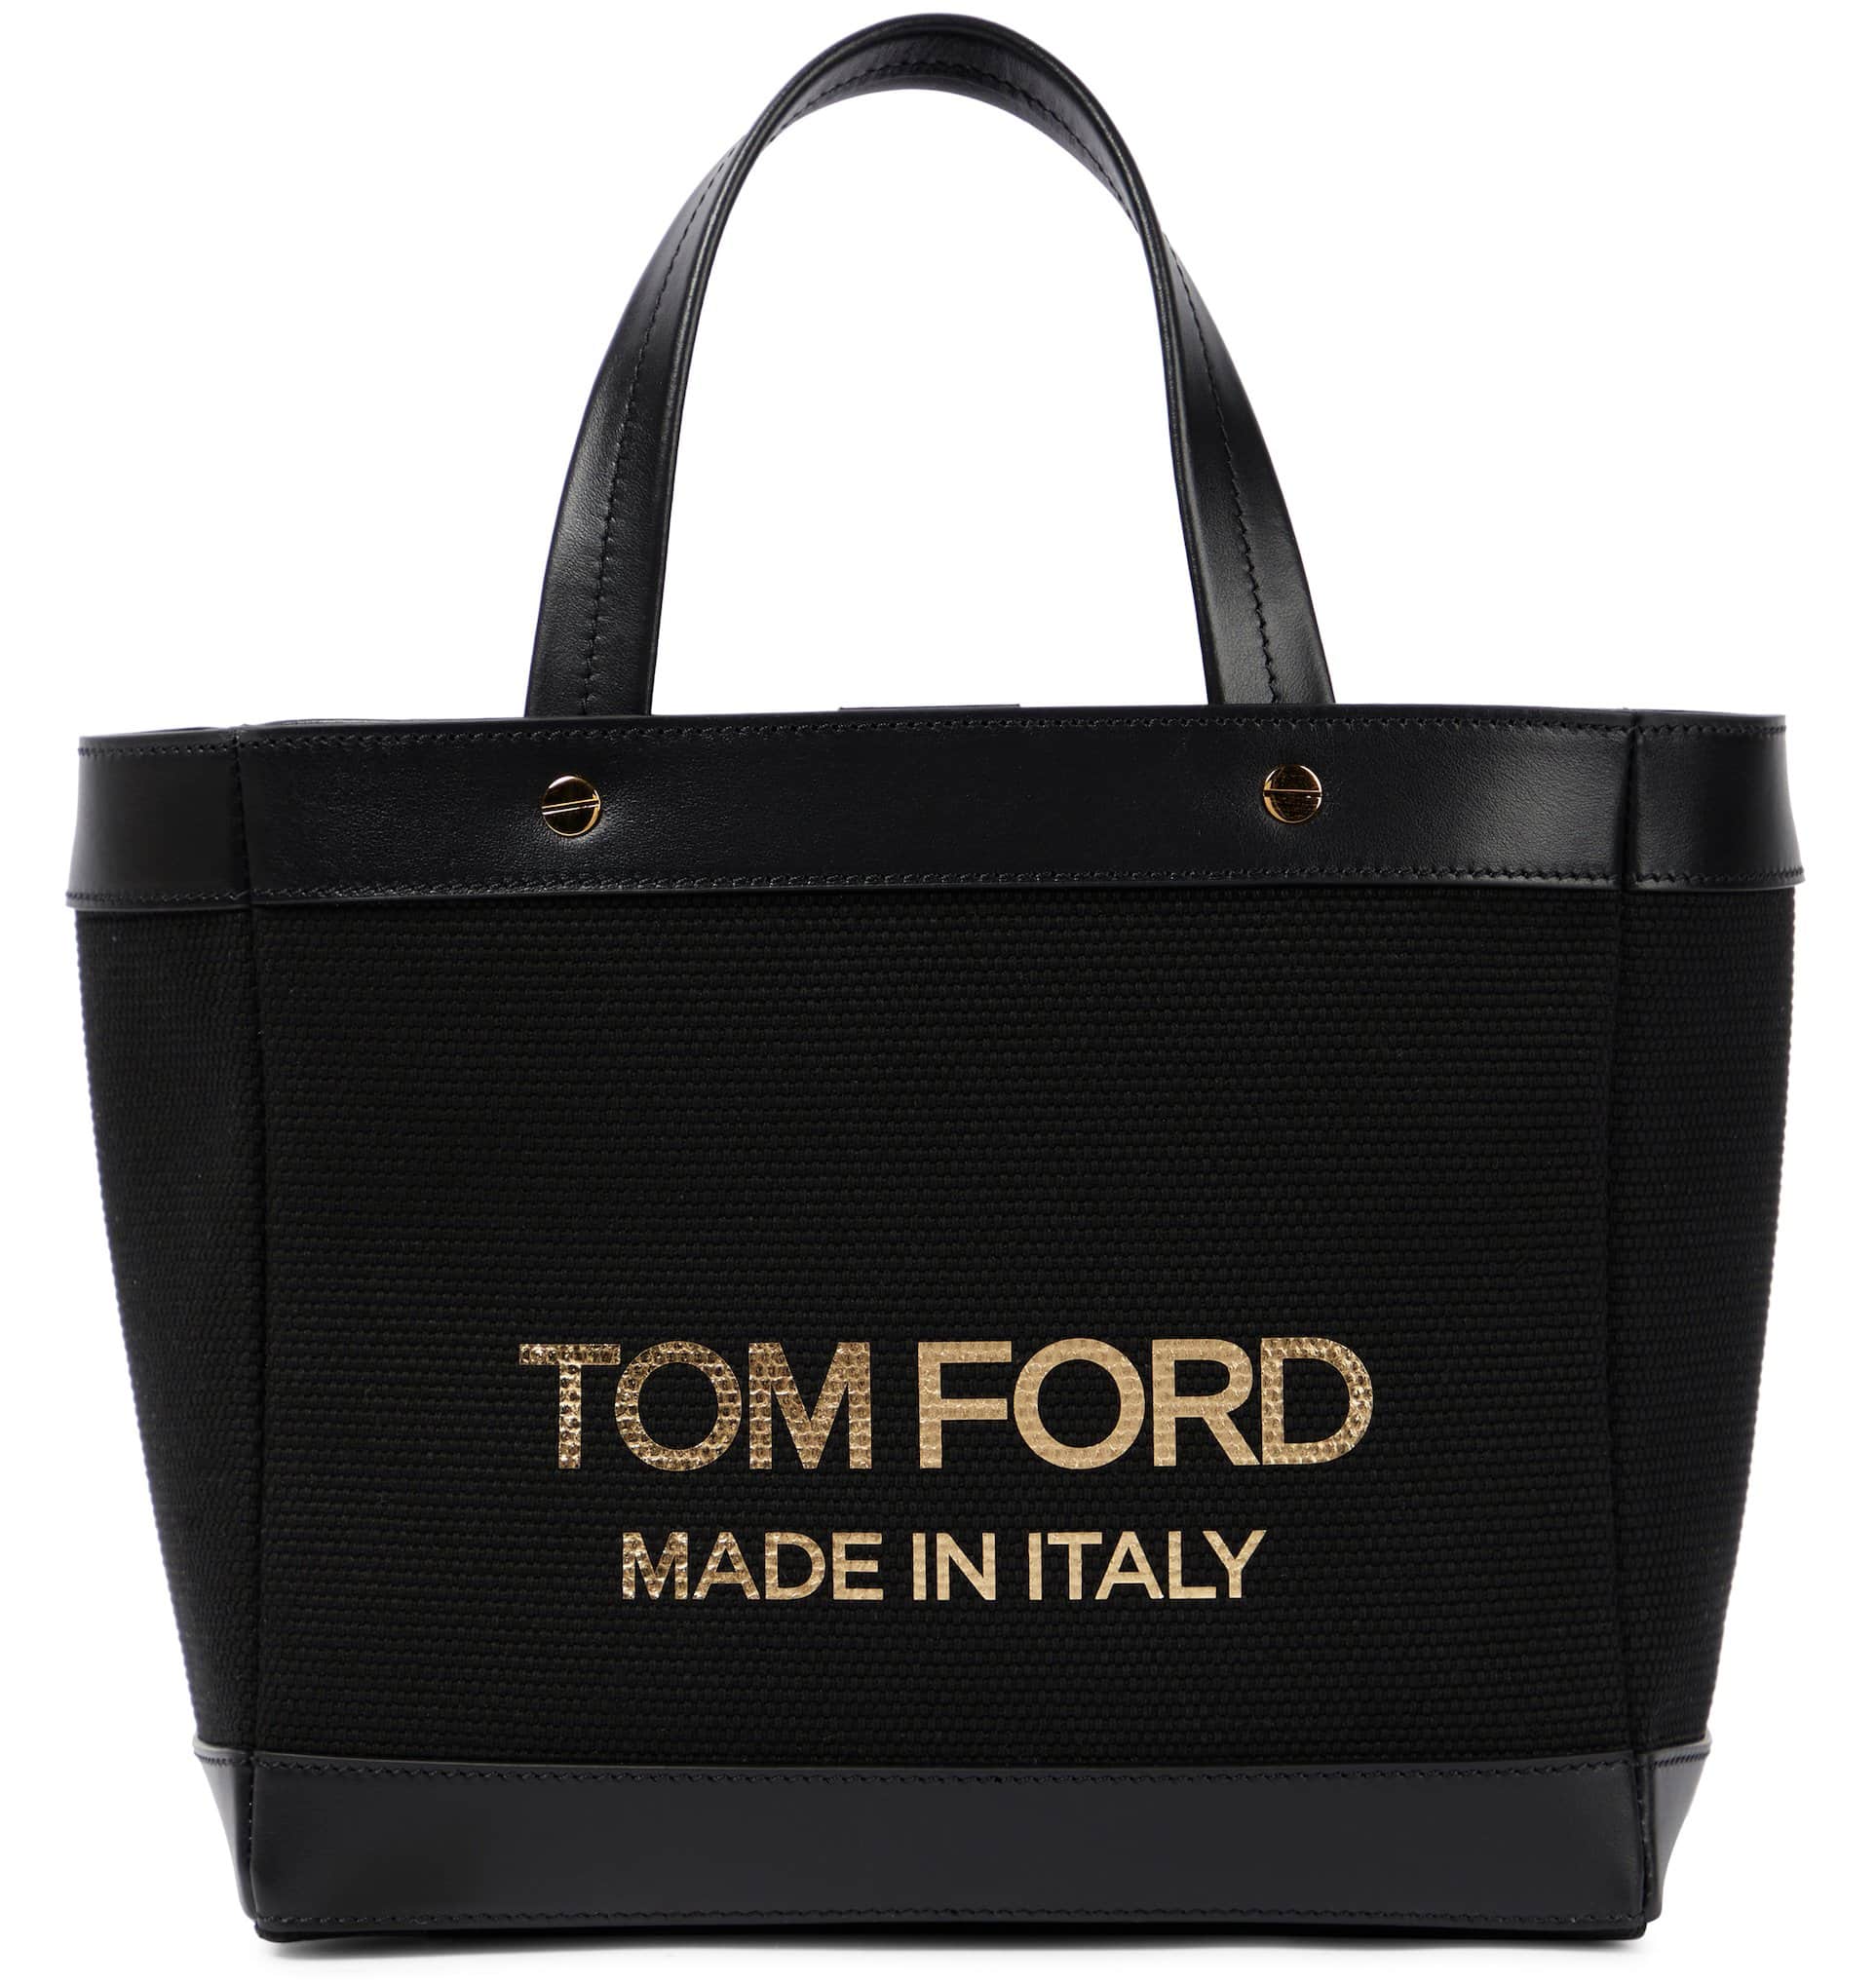 A practical daily companion, Tom Ford's T Screw mini shopper is made from black cotton canvas accented with tonal leather trims and logo detailing